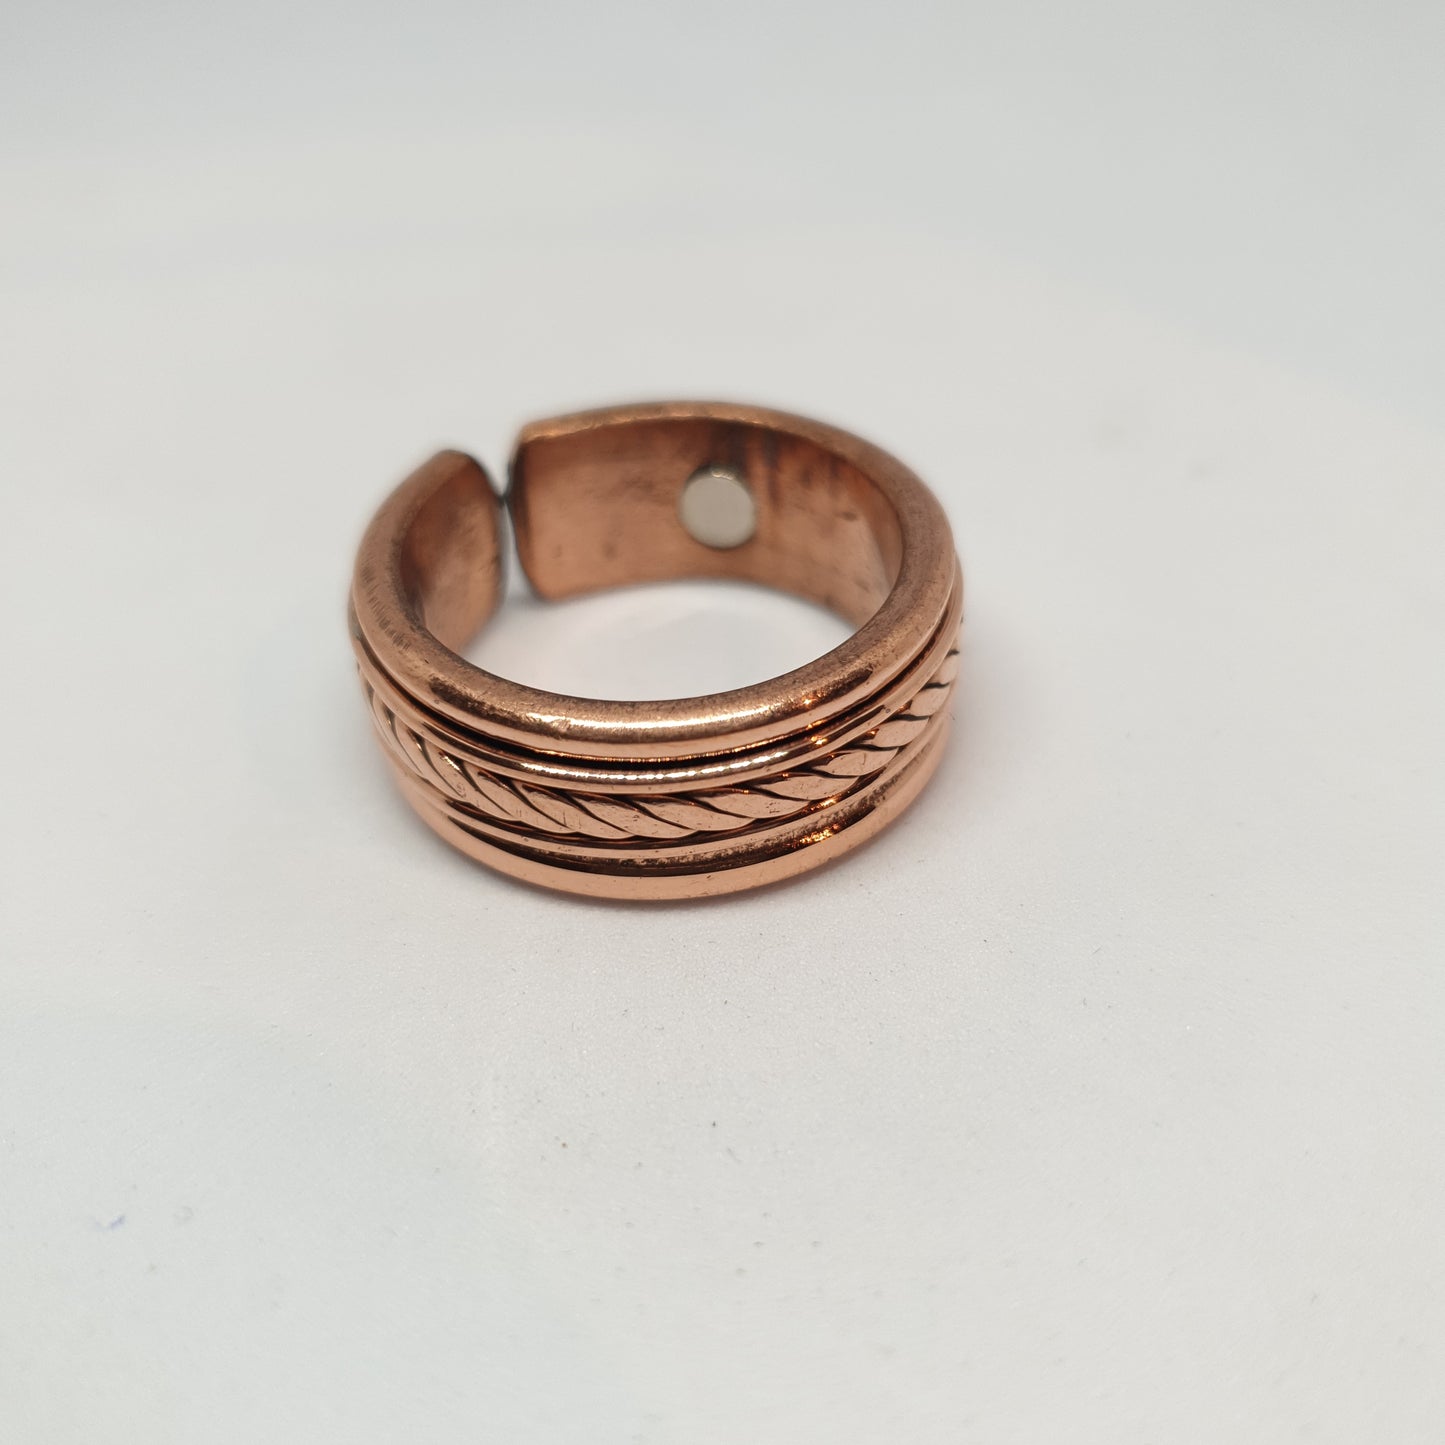 Woven Pattern Copper Magnetic Ring - Rivendell Shop